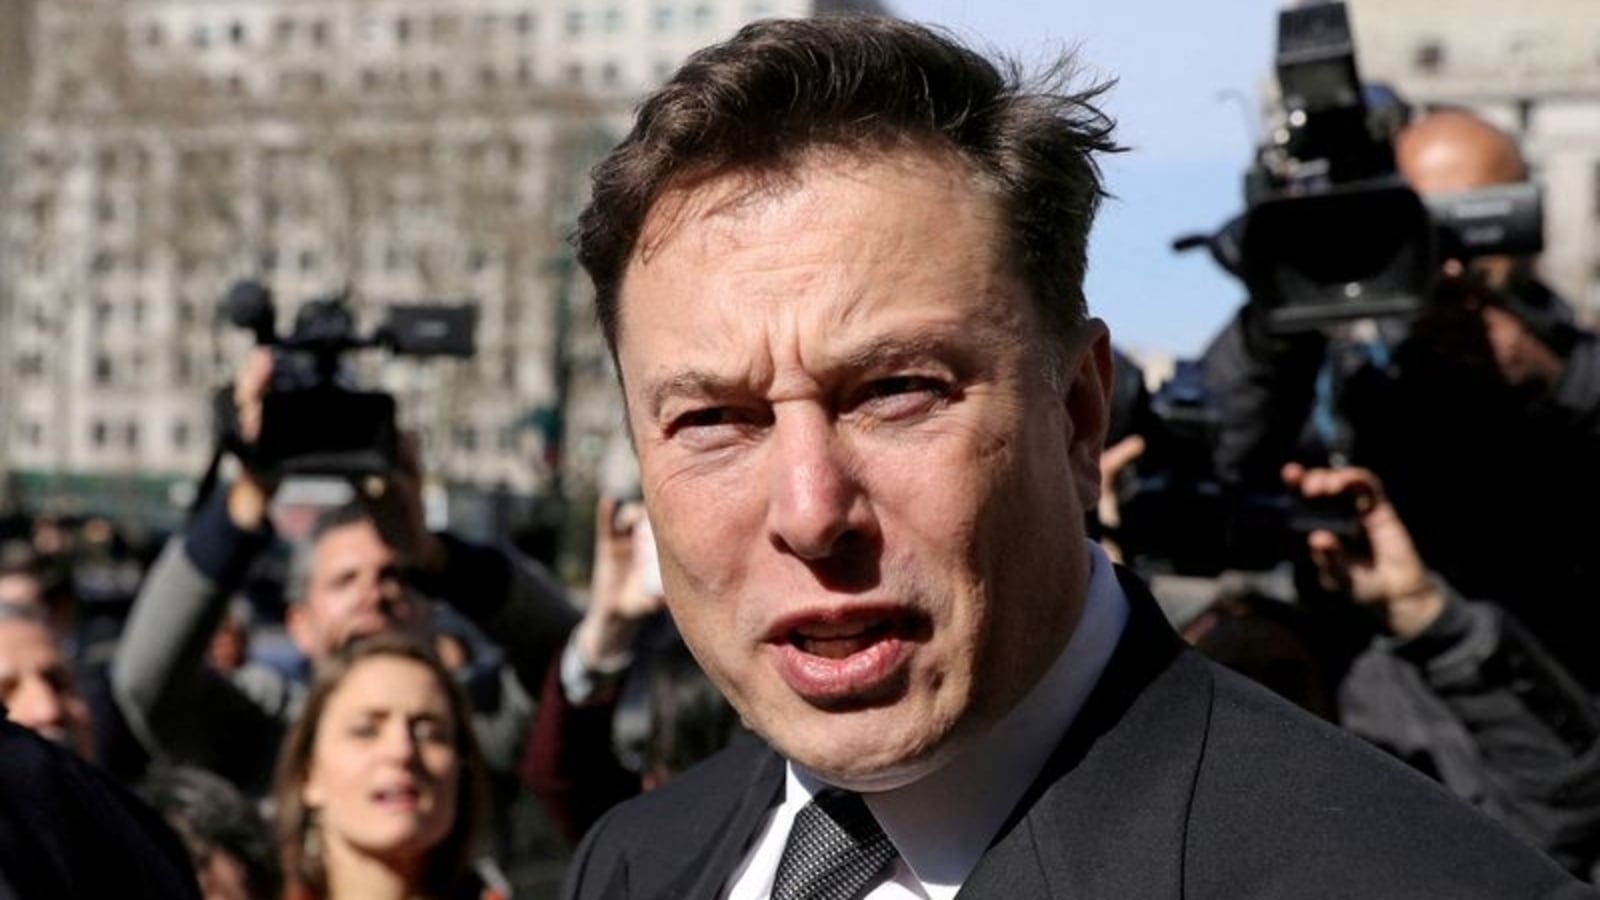 Tesla loses $126 billion in value as investors worry about Musk’s Twitter deal